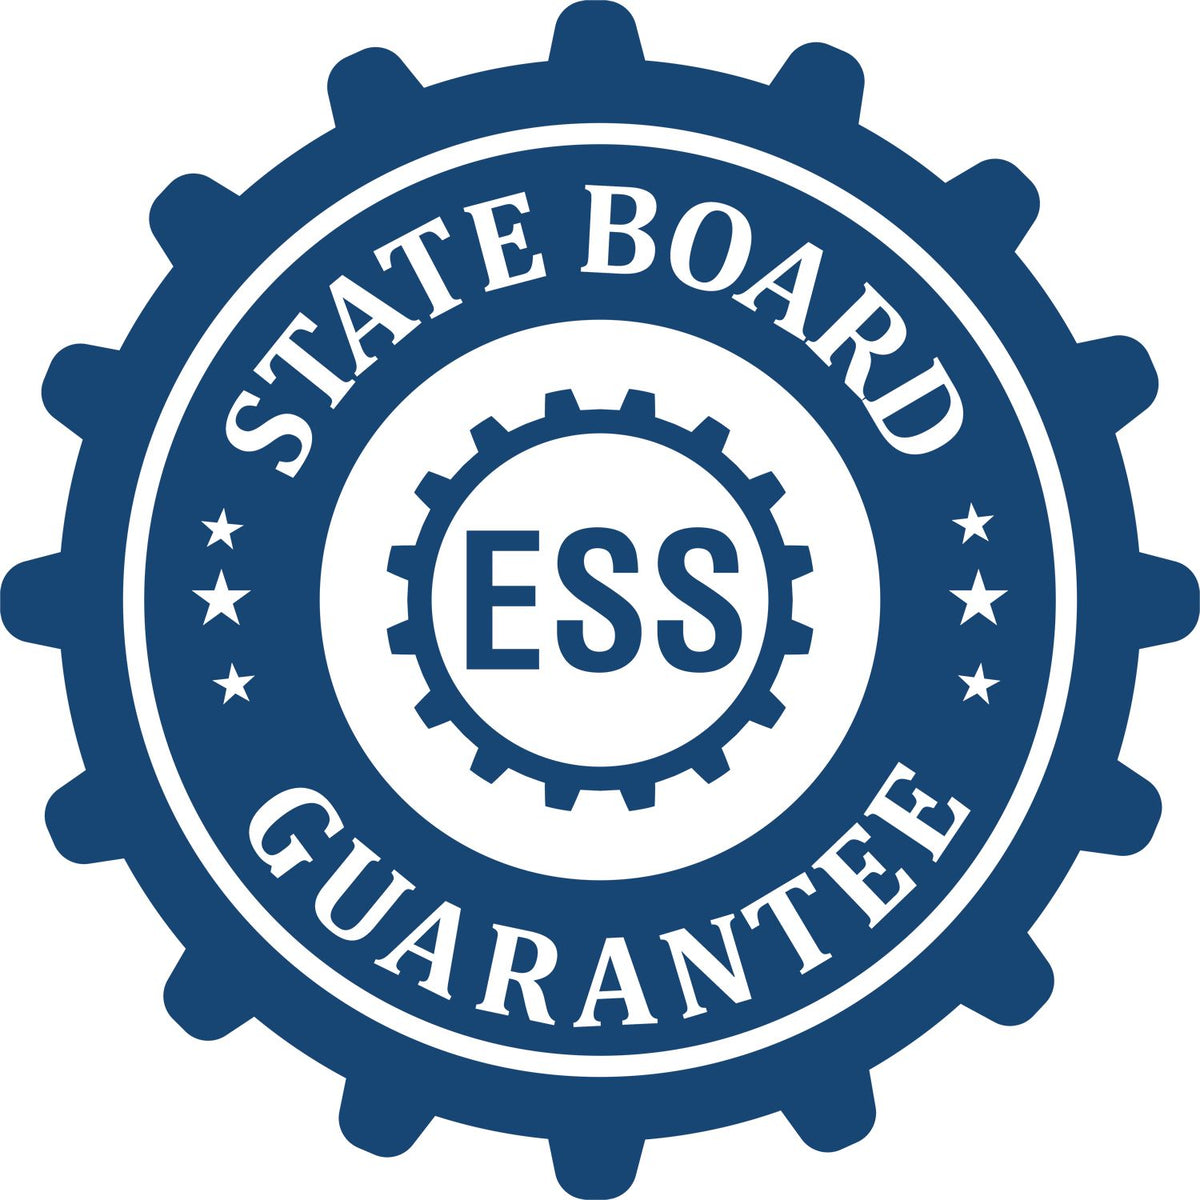 An emblem in a gear shape illustrating a state board guarantee for the Michigan Geologist Desk Seal